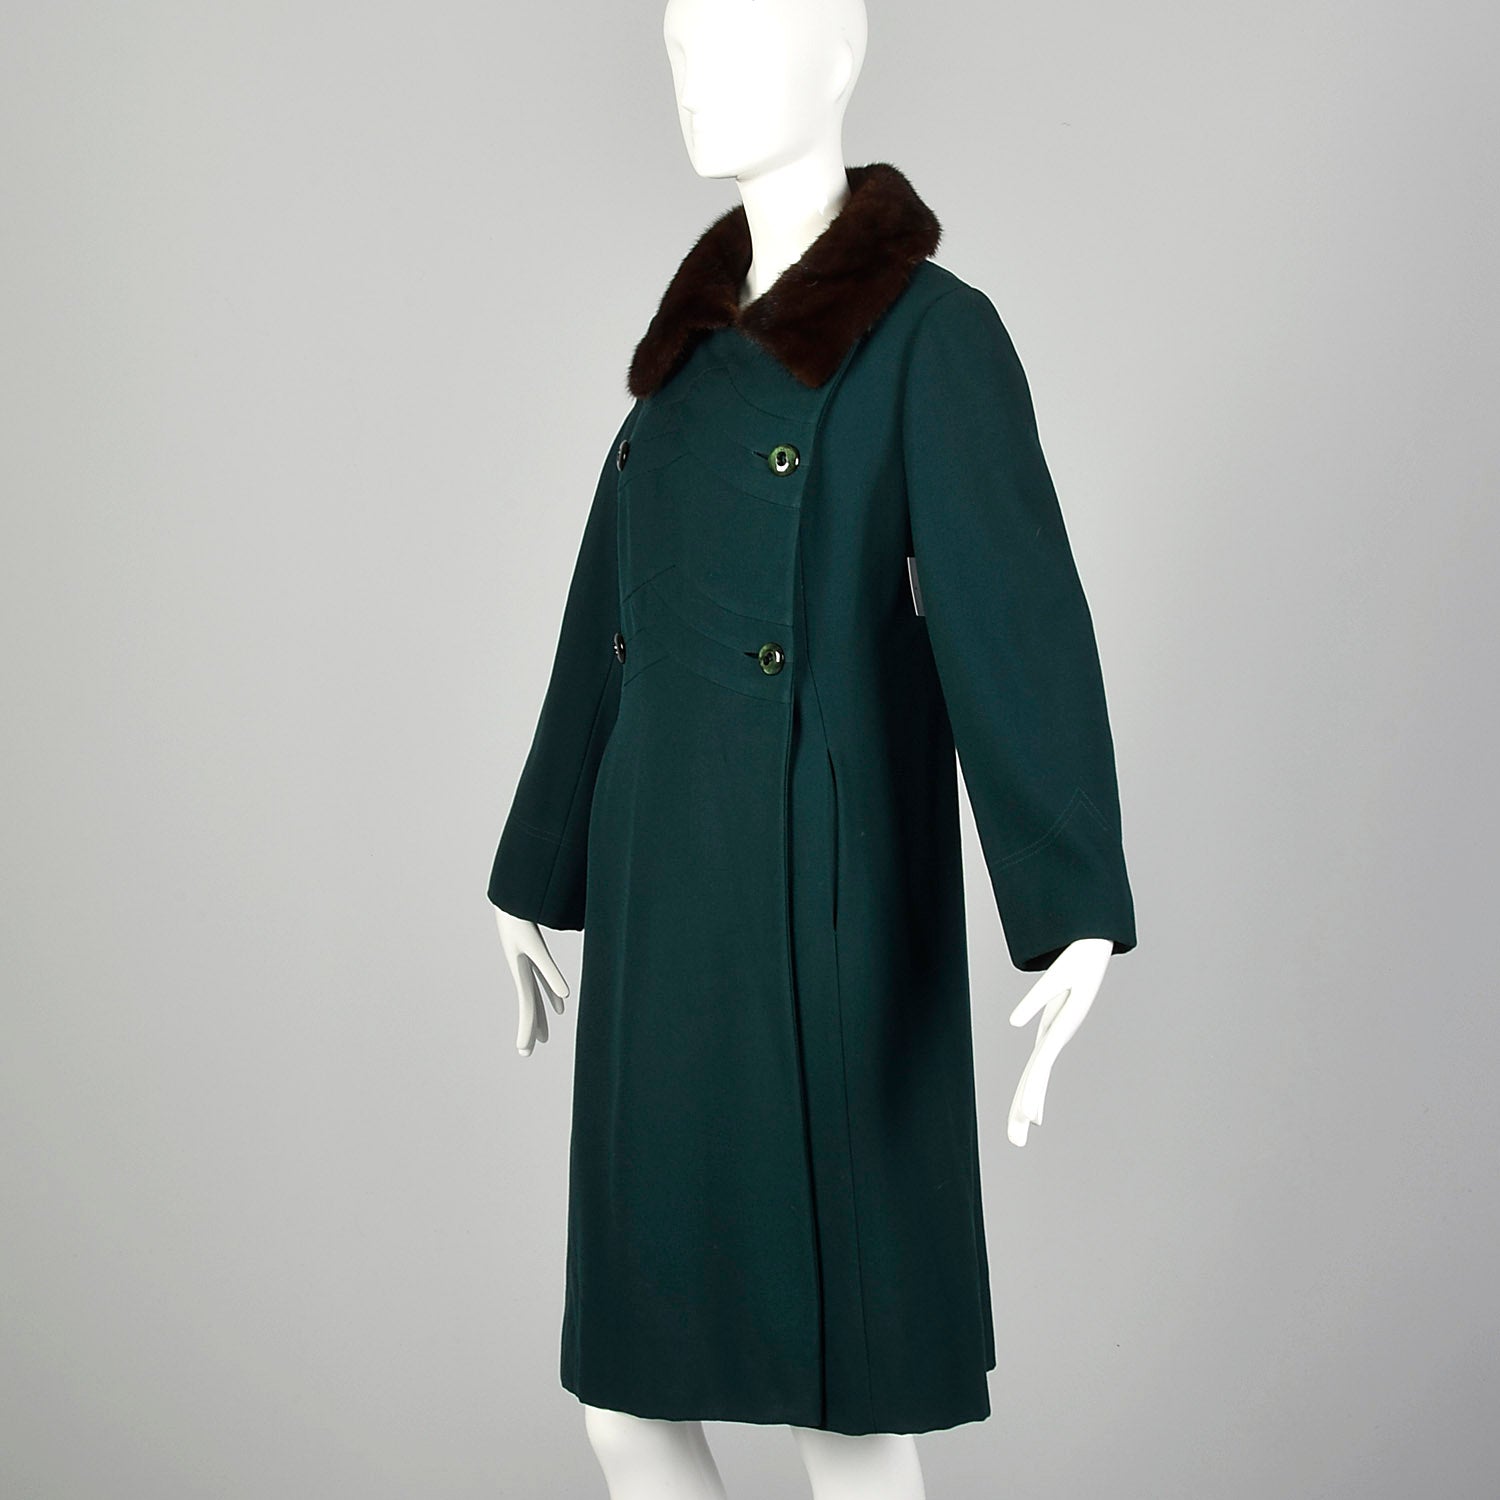 Medium 1960s Green Coat Double Breasted Autumn Outerwear with Mink Fur Collar